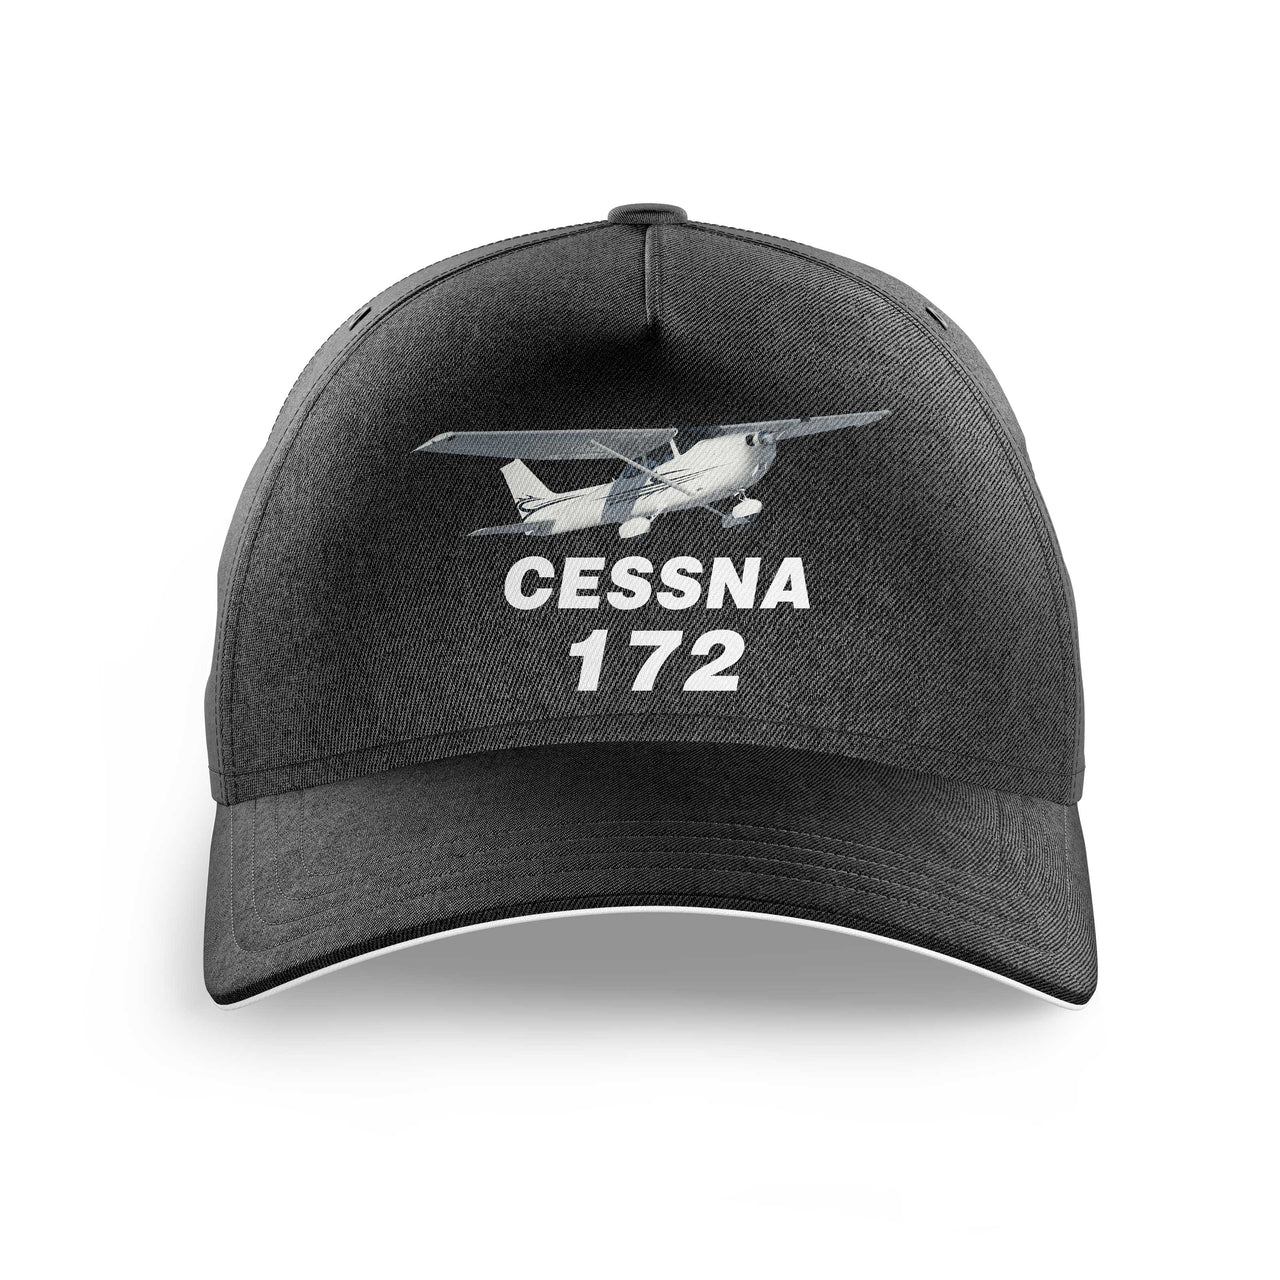 The Cessna 172 Printed Hats